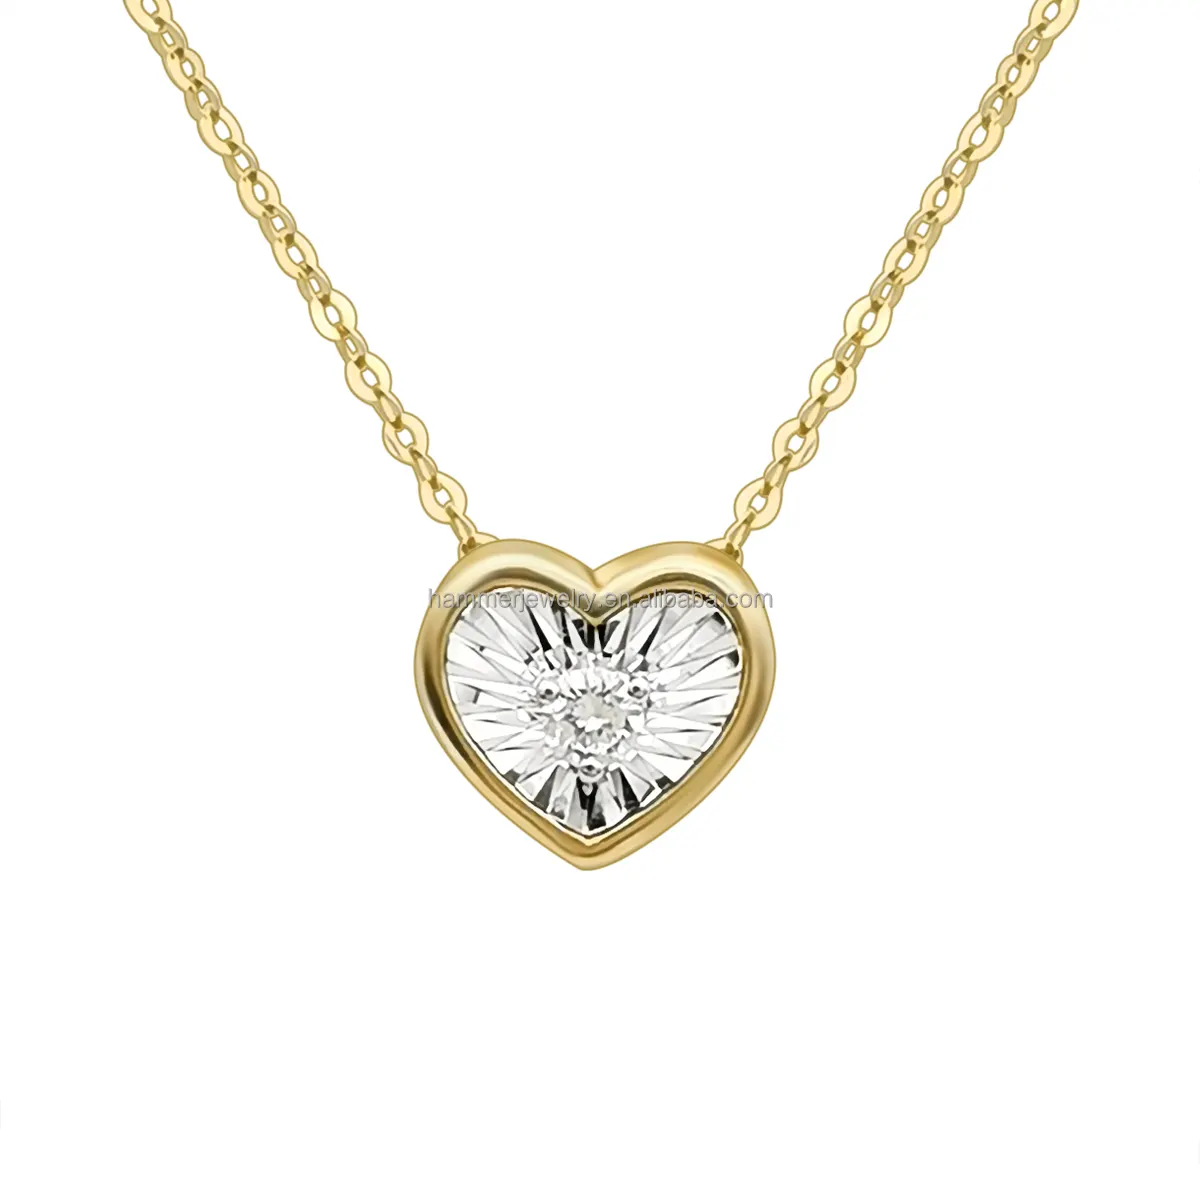 Wholesale Diamond Heart Pendant 18K Gold Necklace Women Jewelry Real Gold Chain Charm Necklaces Gift